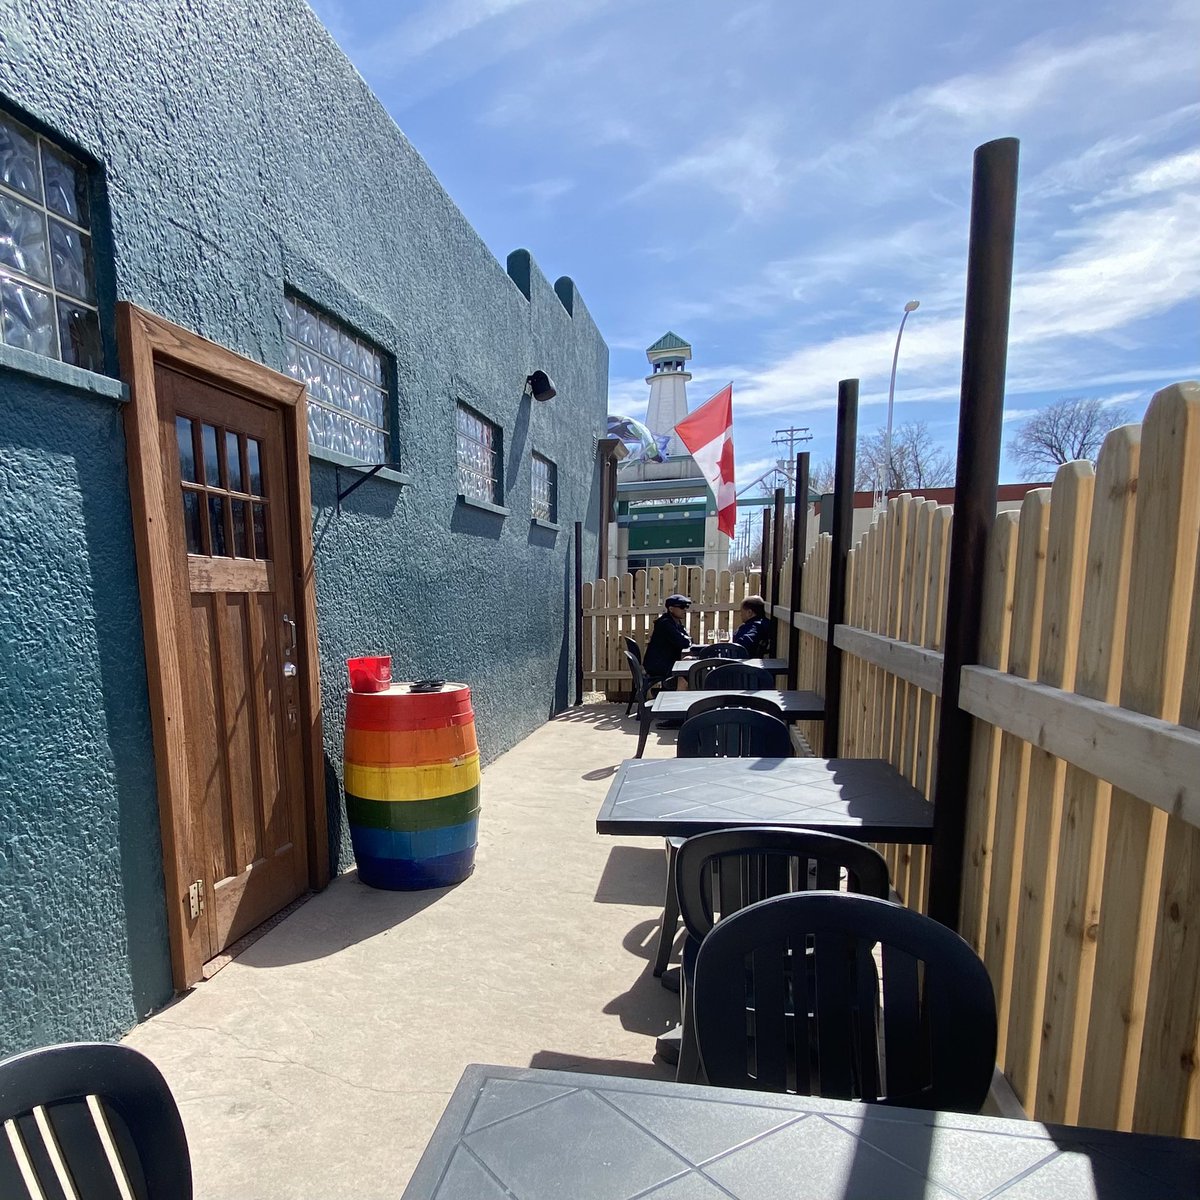 The patio’s open (for drinks) - come take advantage of this beautiful weather! #gimli #publife #patioseason